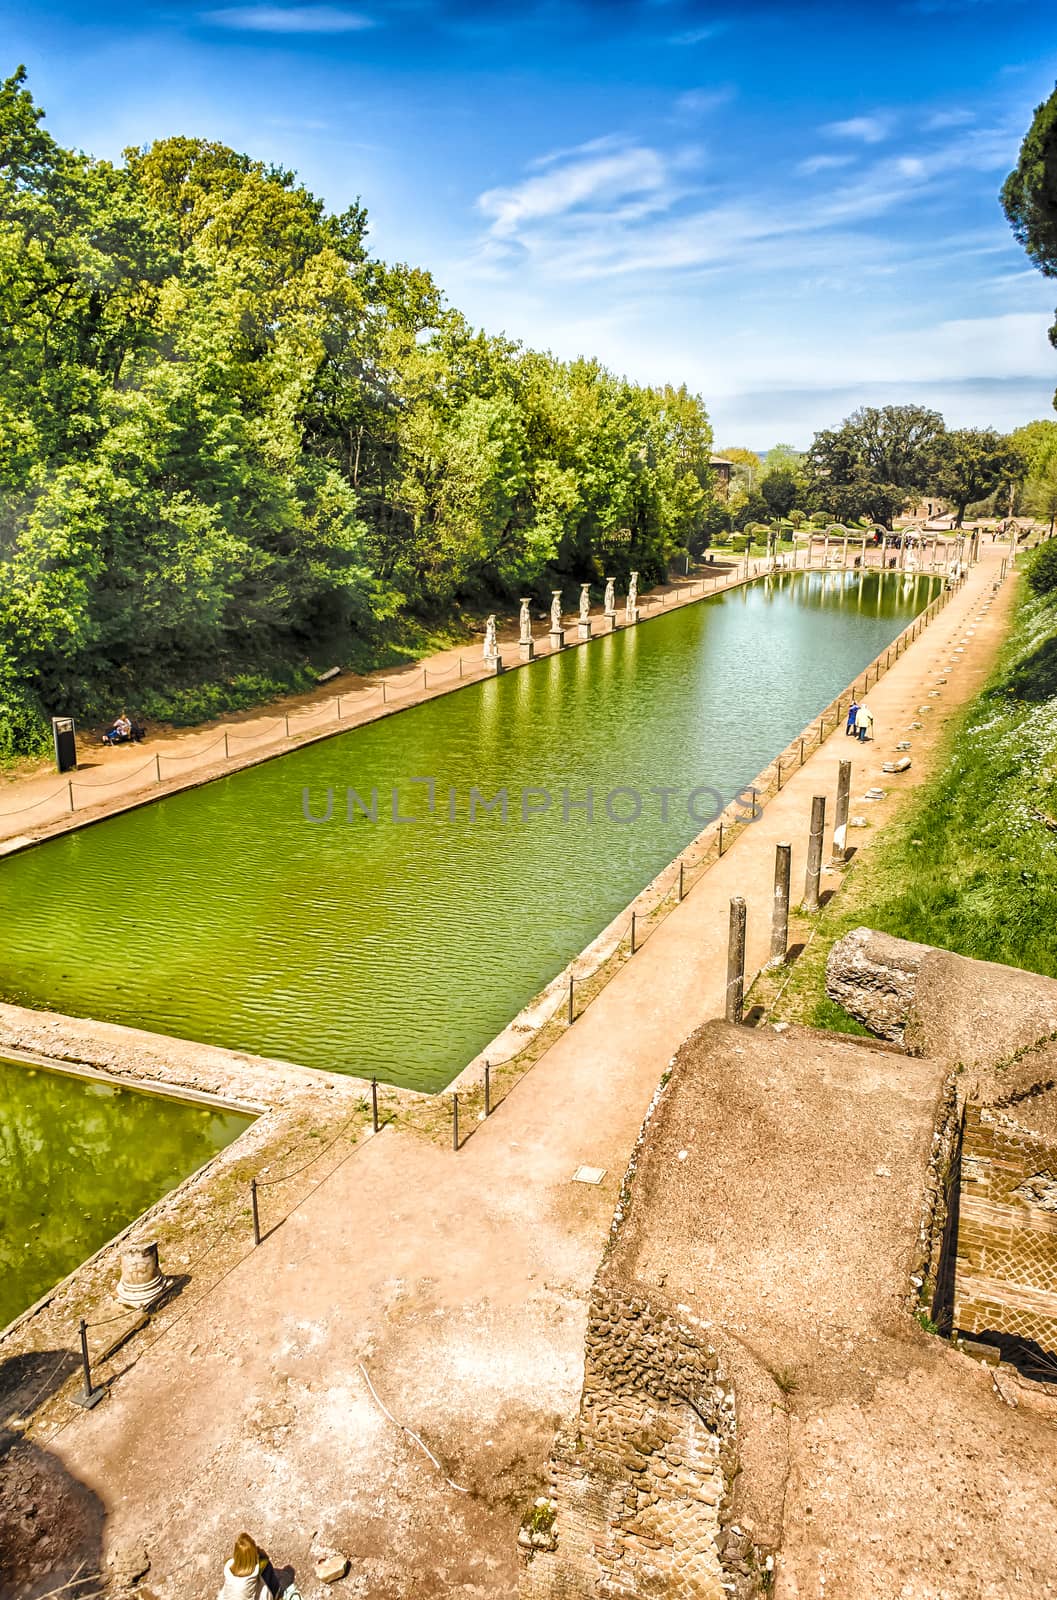 The Ancient Pool called Canopus, surrounded by greek sculptures in Villa Adriana (Hadrian's Villa), Tivoli, Italy